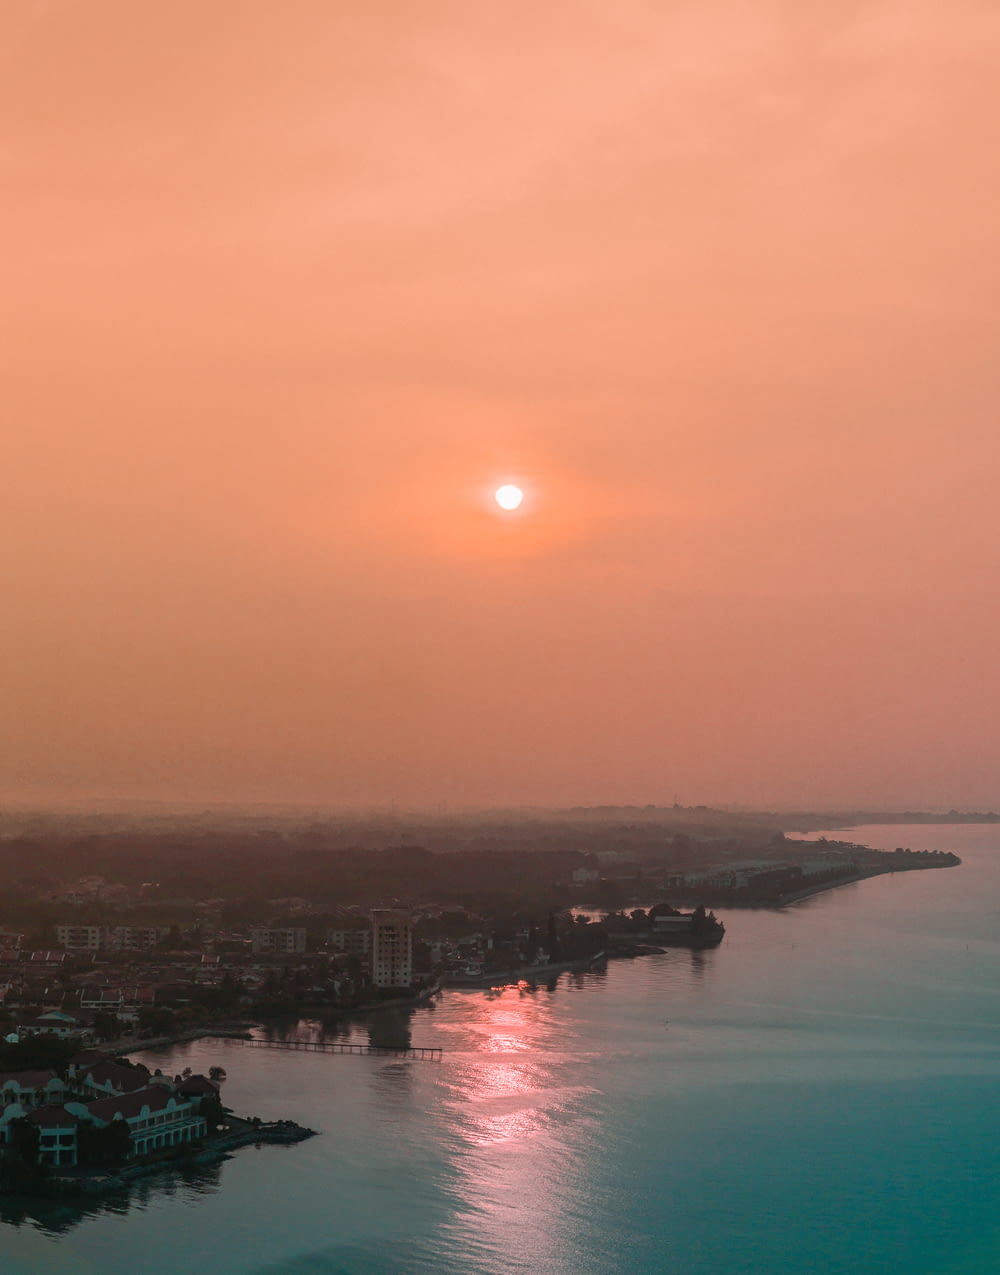 a sunset over a body of water with a city in the distance